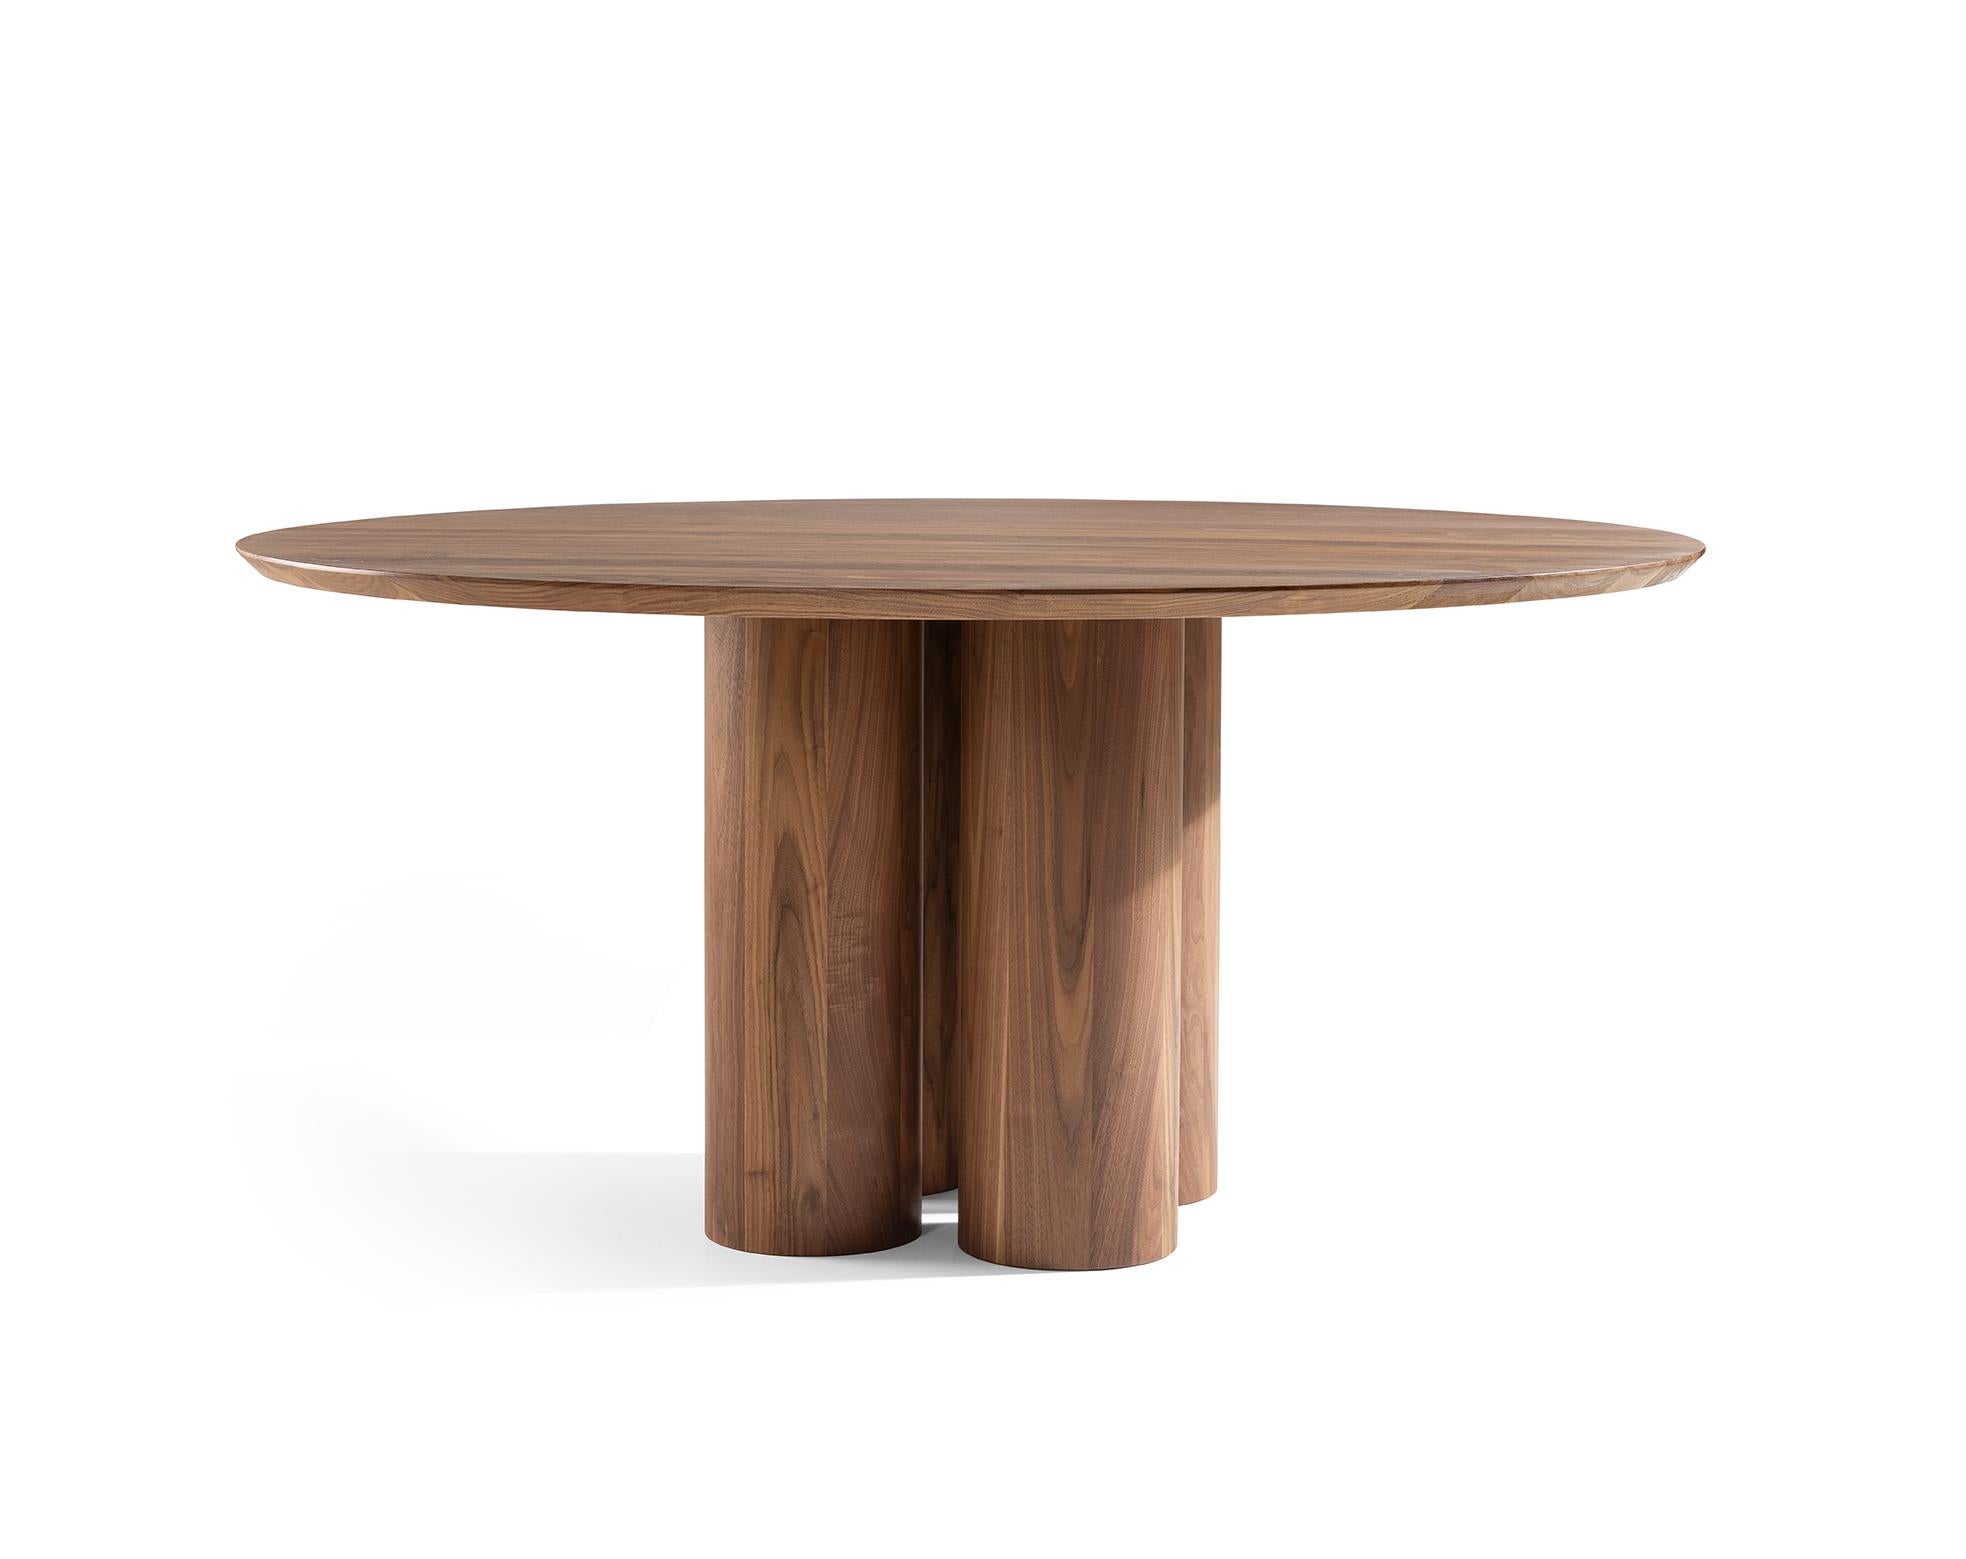 Large, round, tough and of course completely massive in solid American walnut. A beautiful round table with 3 or 4 heavy, round legs. In the 'small' size of 110cm diameter with 3 legs and in the large size of 220cm diameter with 4 legs. The tapered